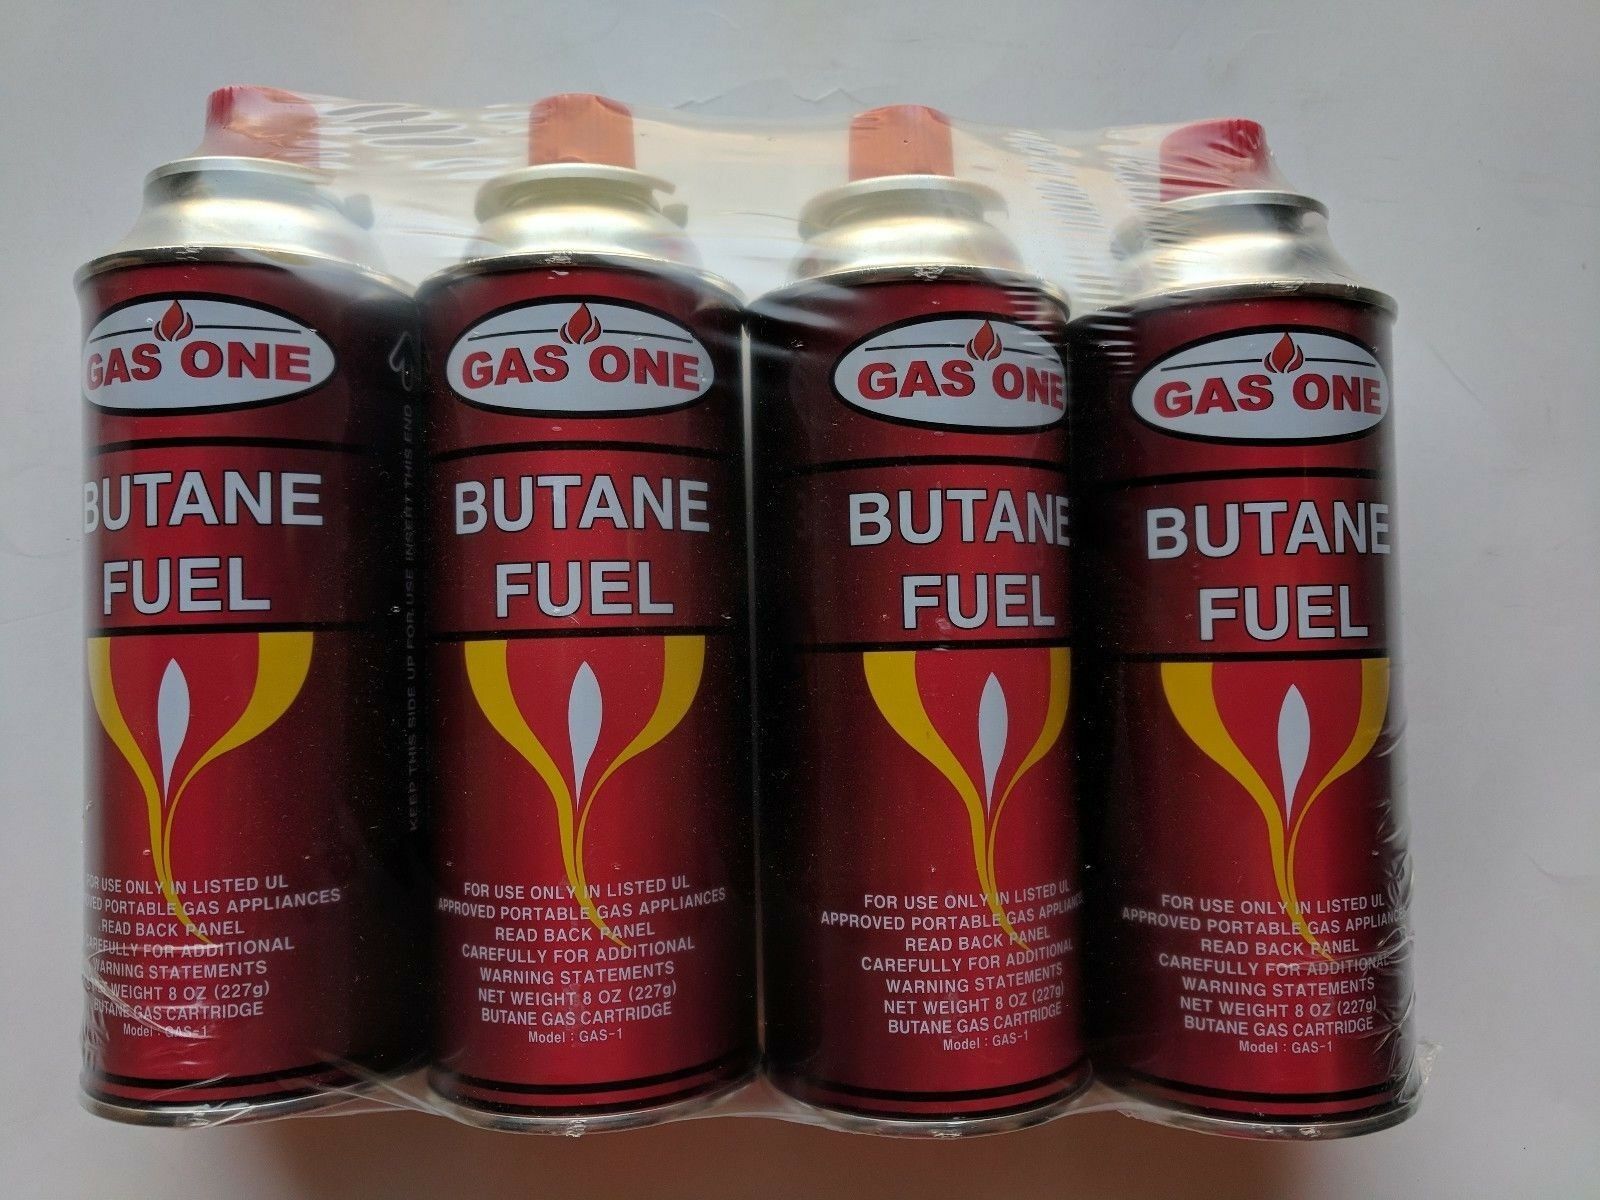 Gasone Butane Fuel Portable Stove Burner Camping 8 Oz Canisters 4-pack